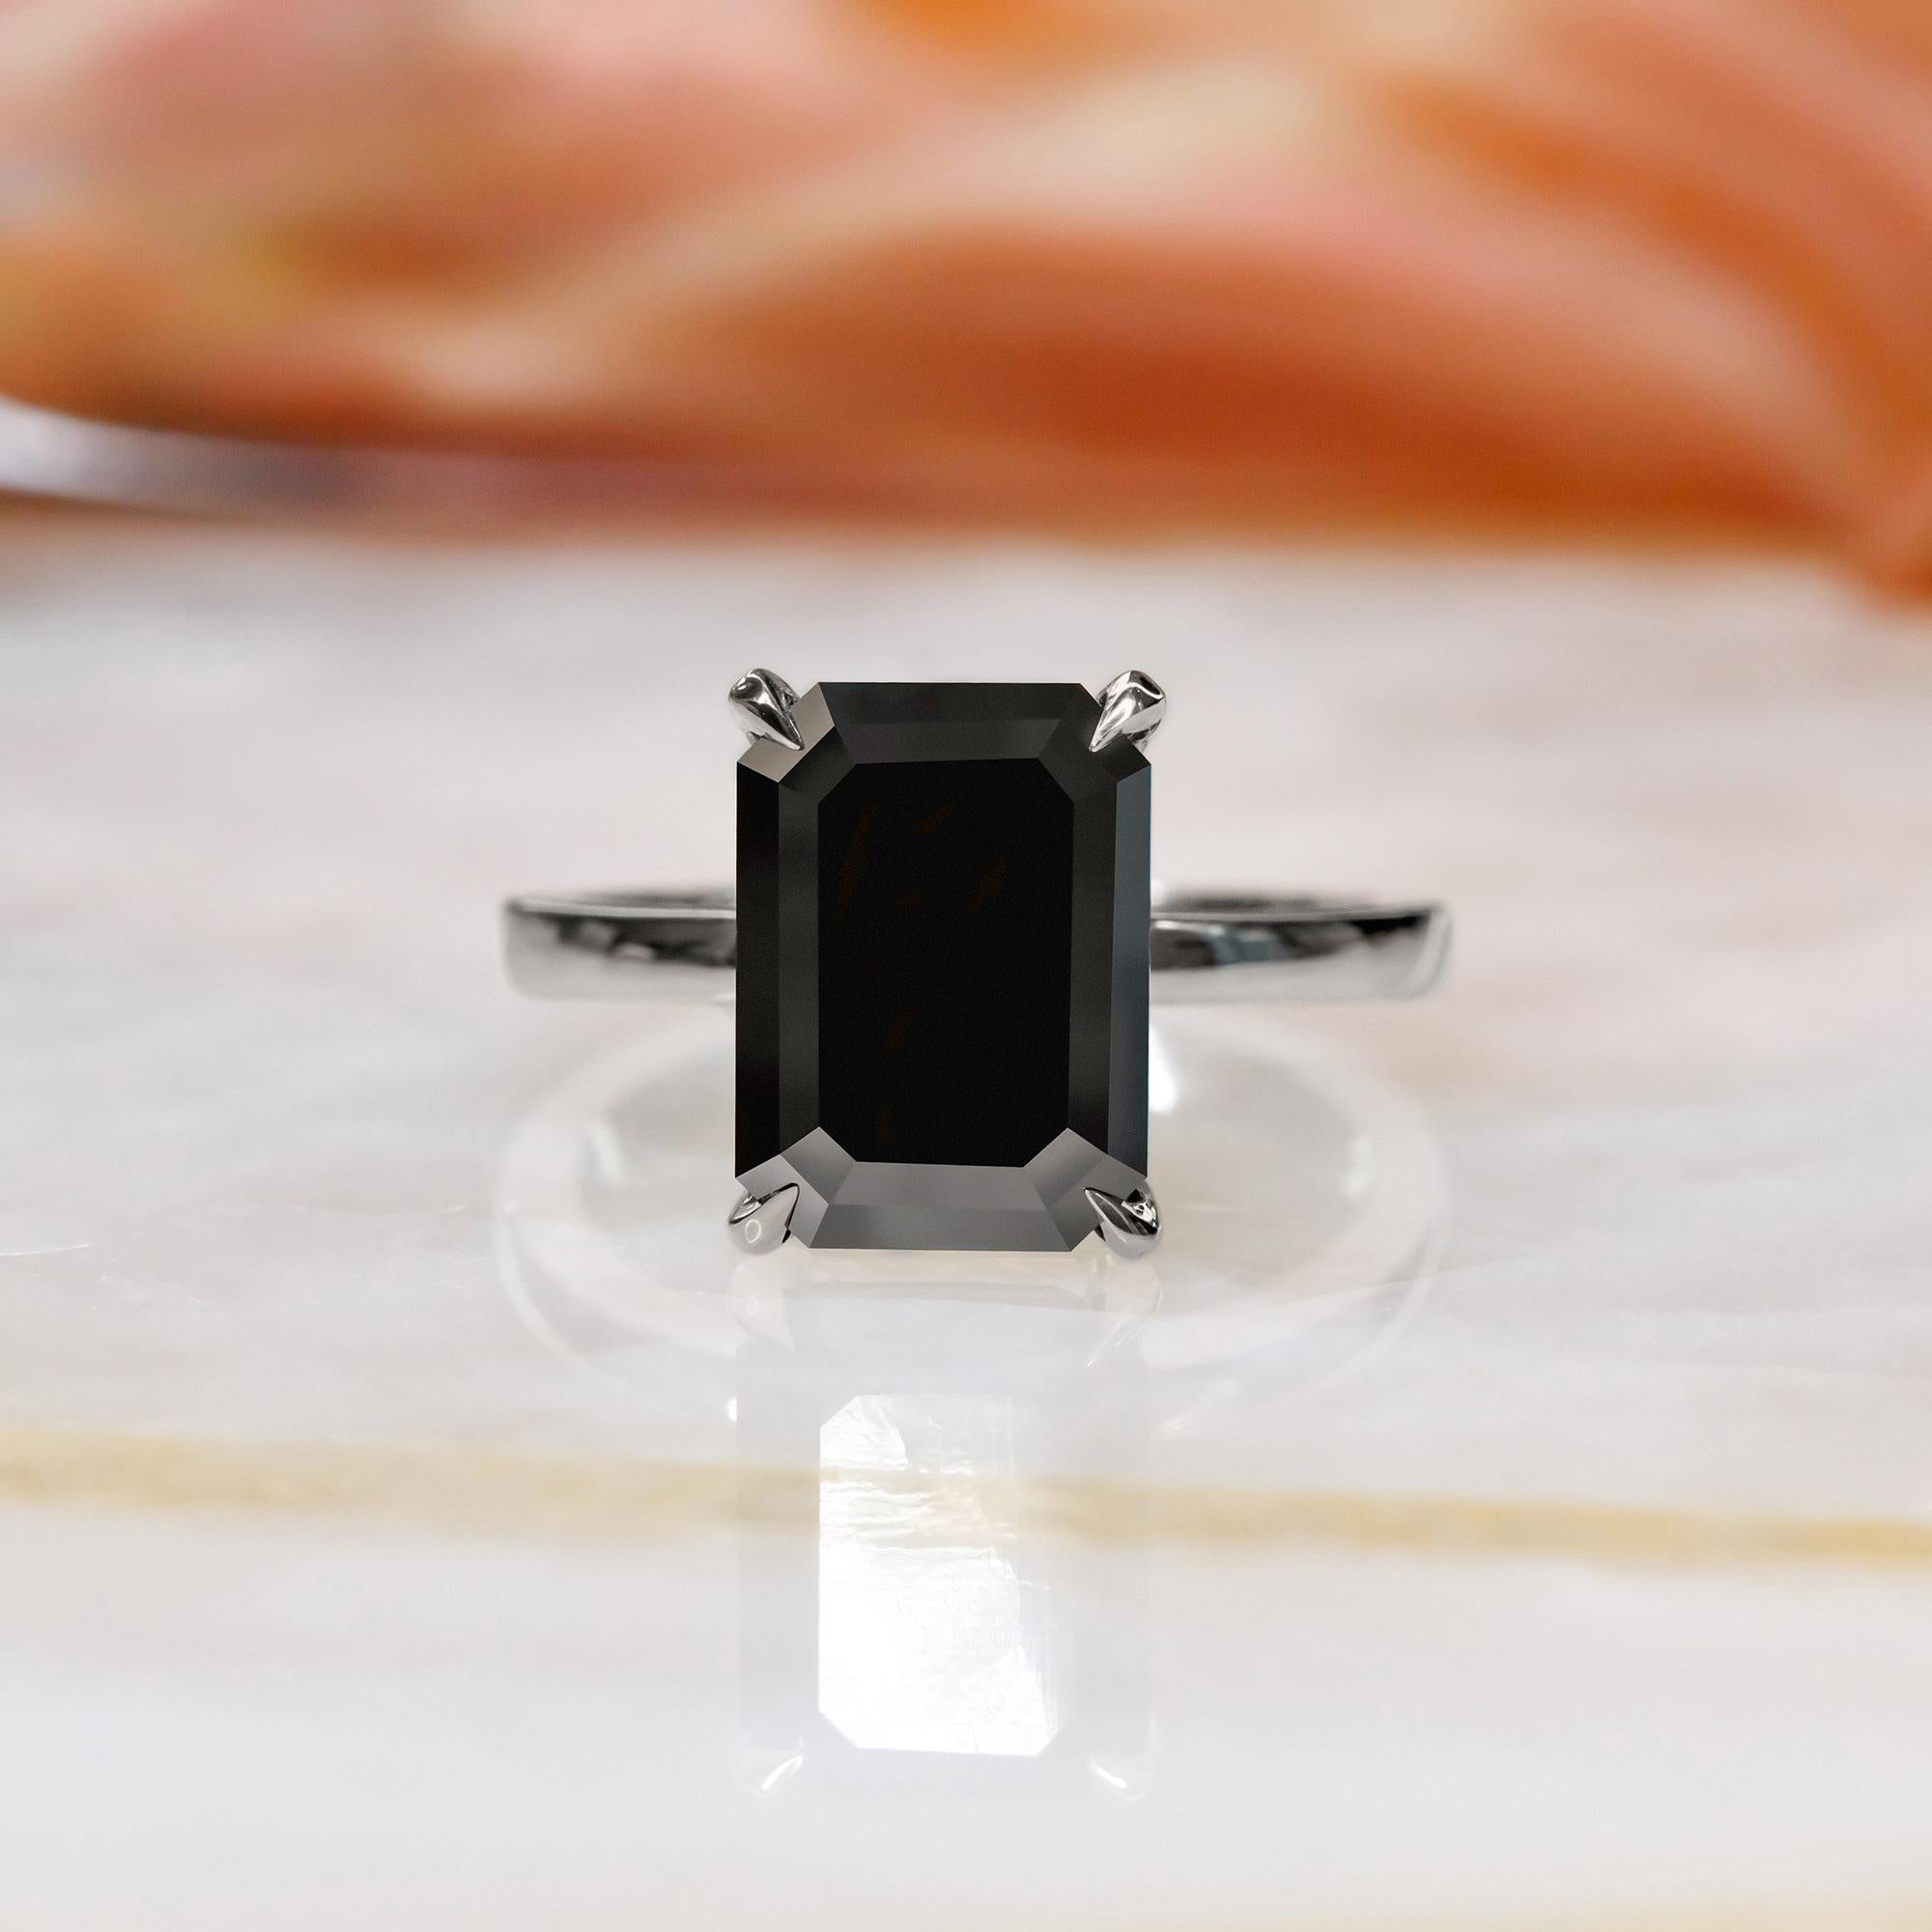 -Total Carat Weight: 2.52 Carats
-14K White Gold
-Size: Resizable

Notes:
- All diamonds are natural, earth-mined diamonds that were suitable for Color Enhancement into Fancy Black color.
- All Jewelry are made to order hence any size and gold